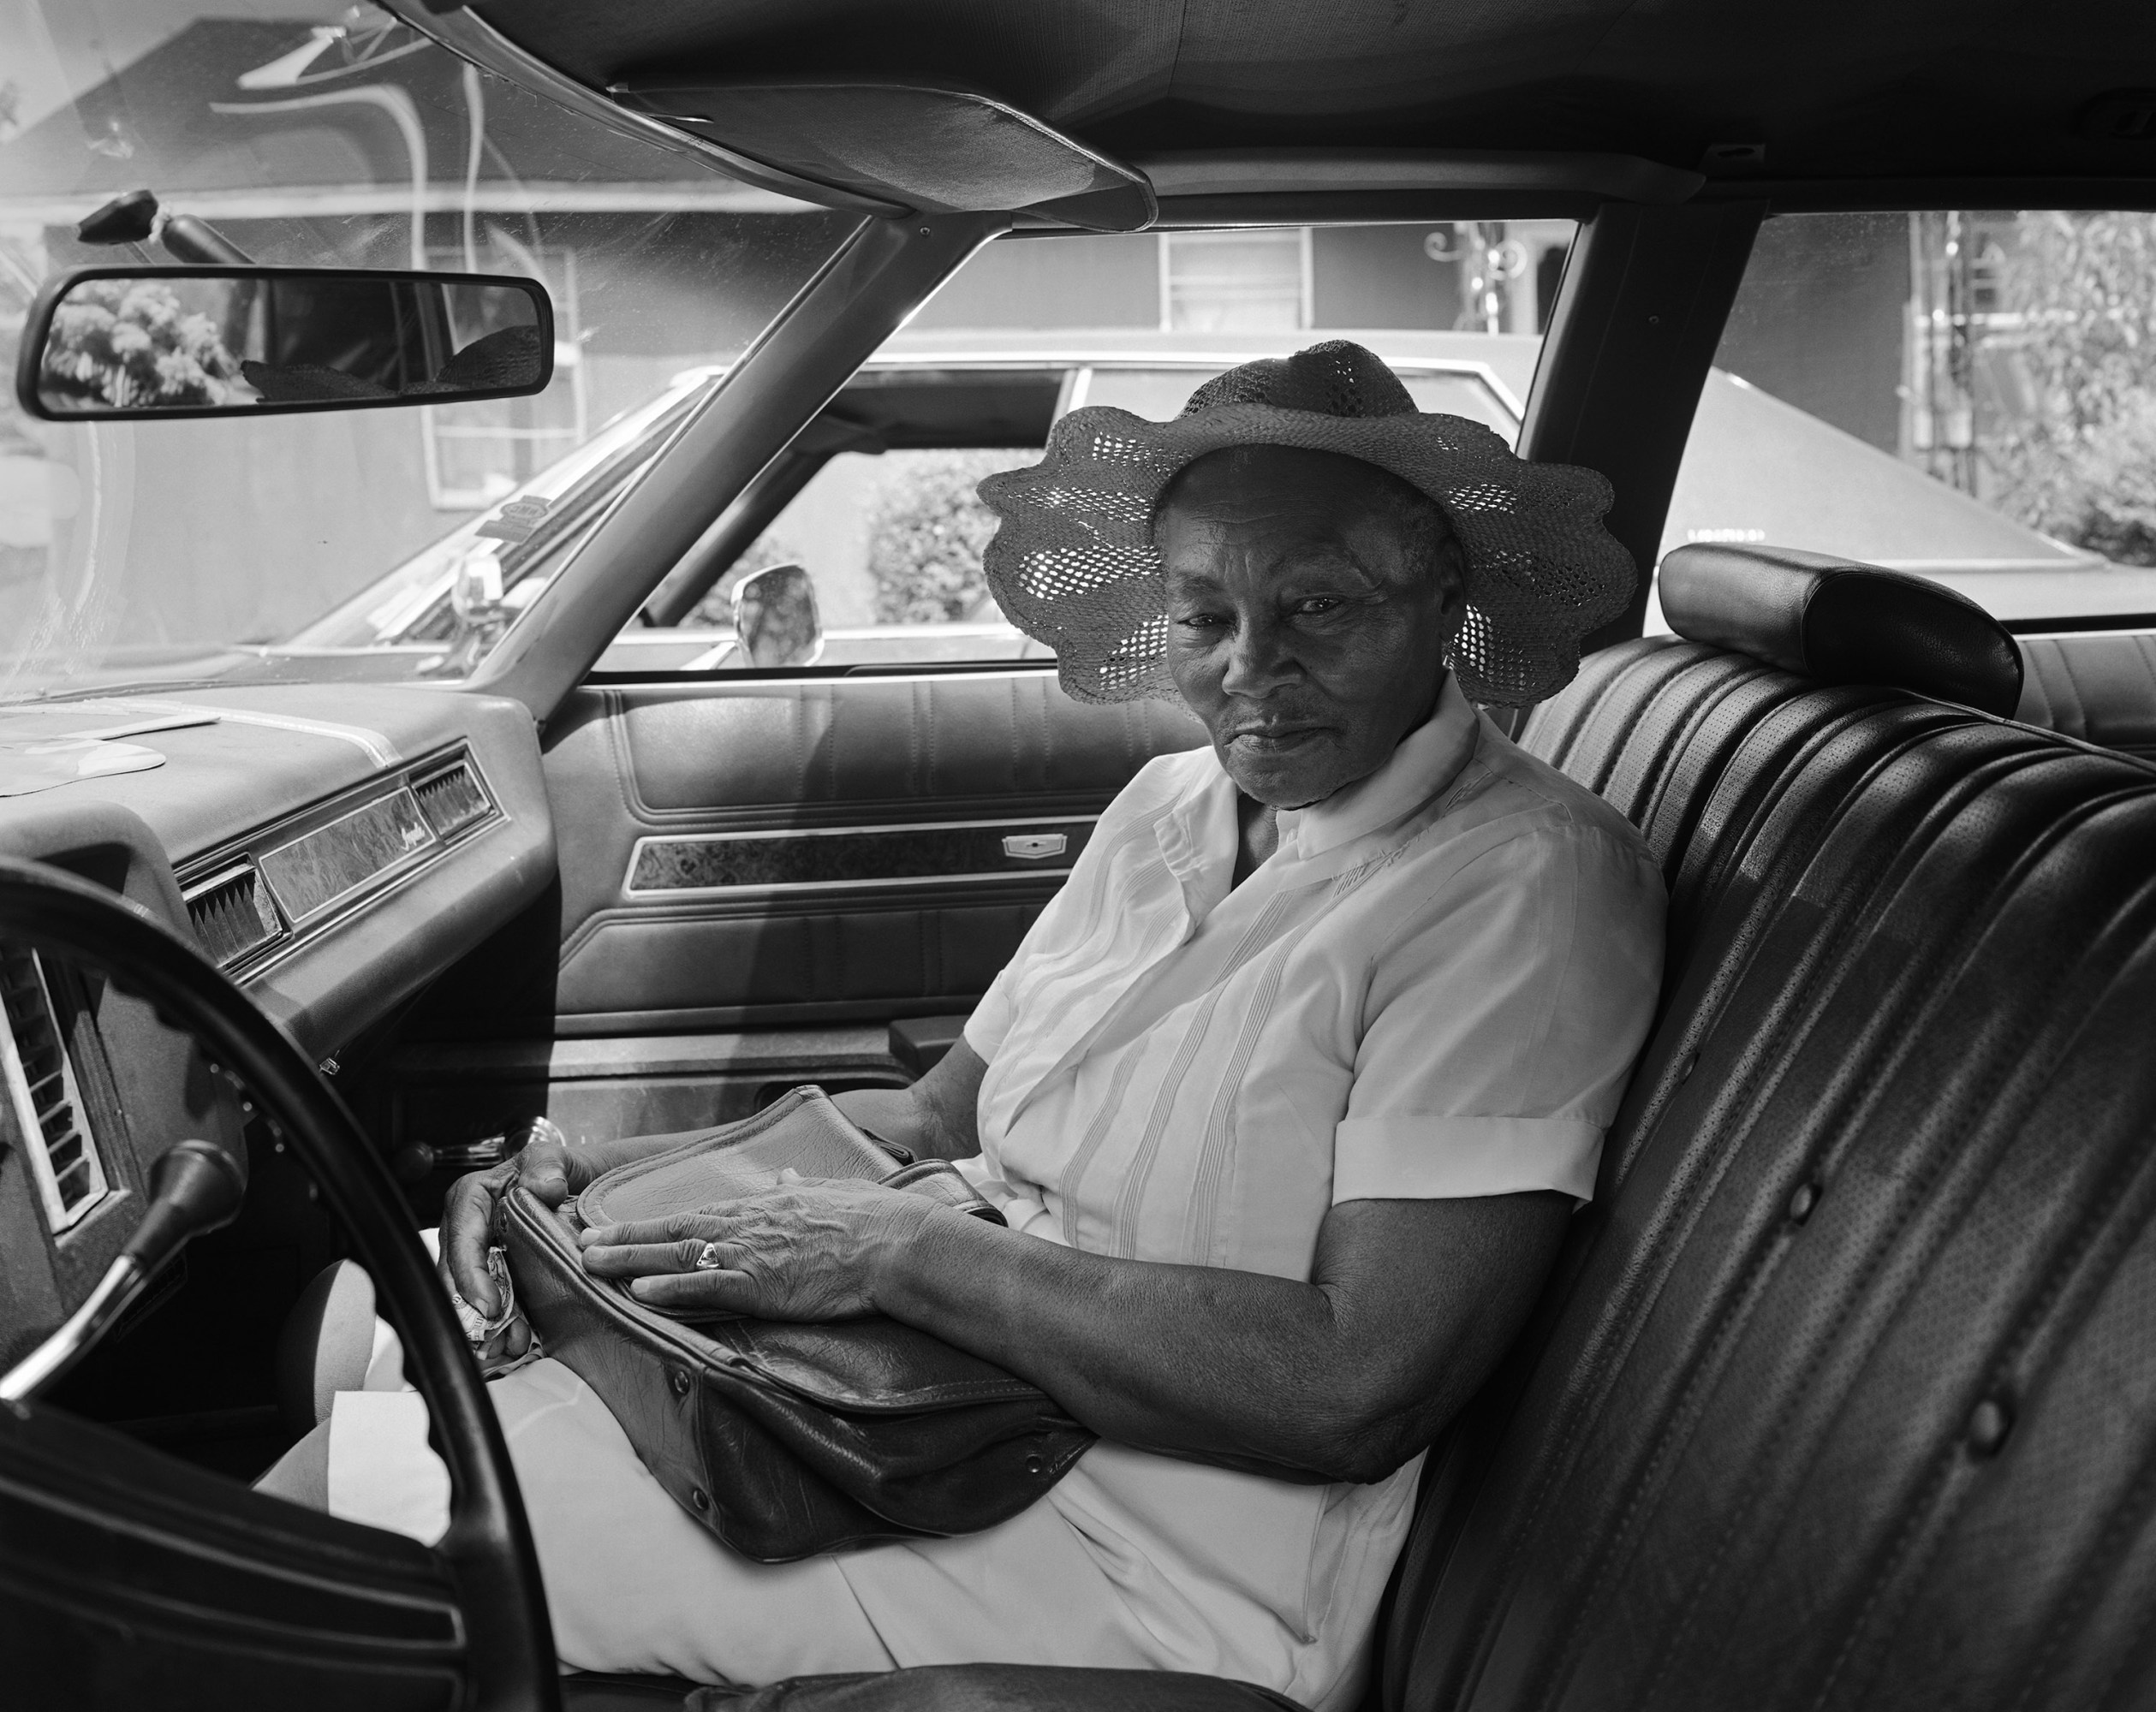 Driver's side view of the interior of a car where an older woman wearing a sunhat sits in the passenger seat.